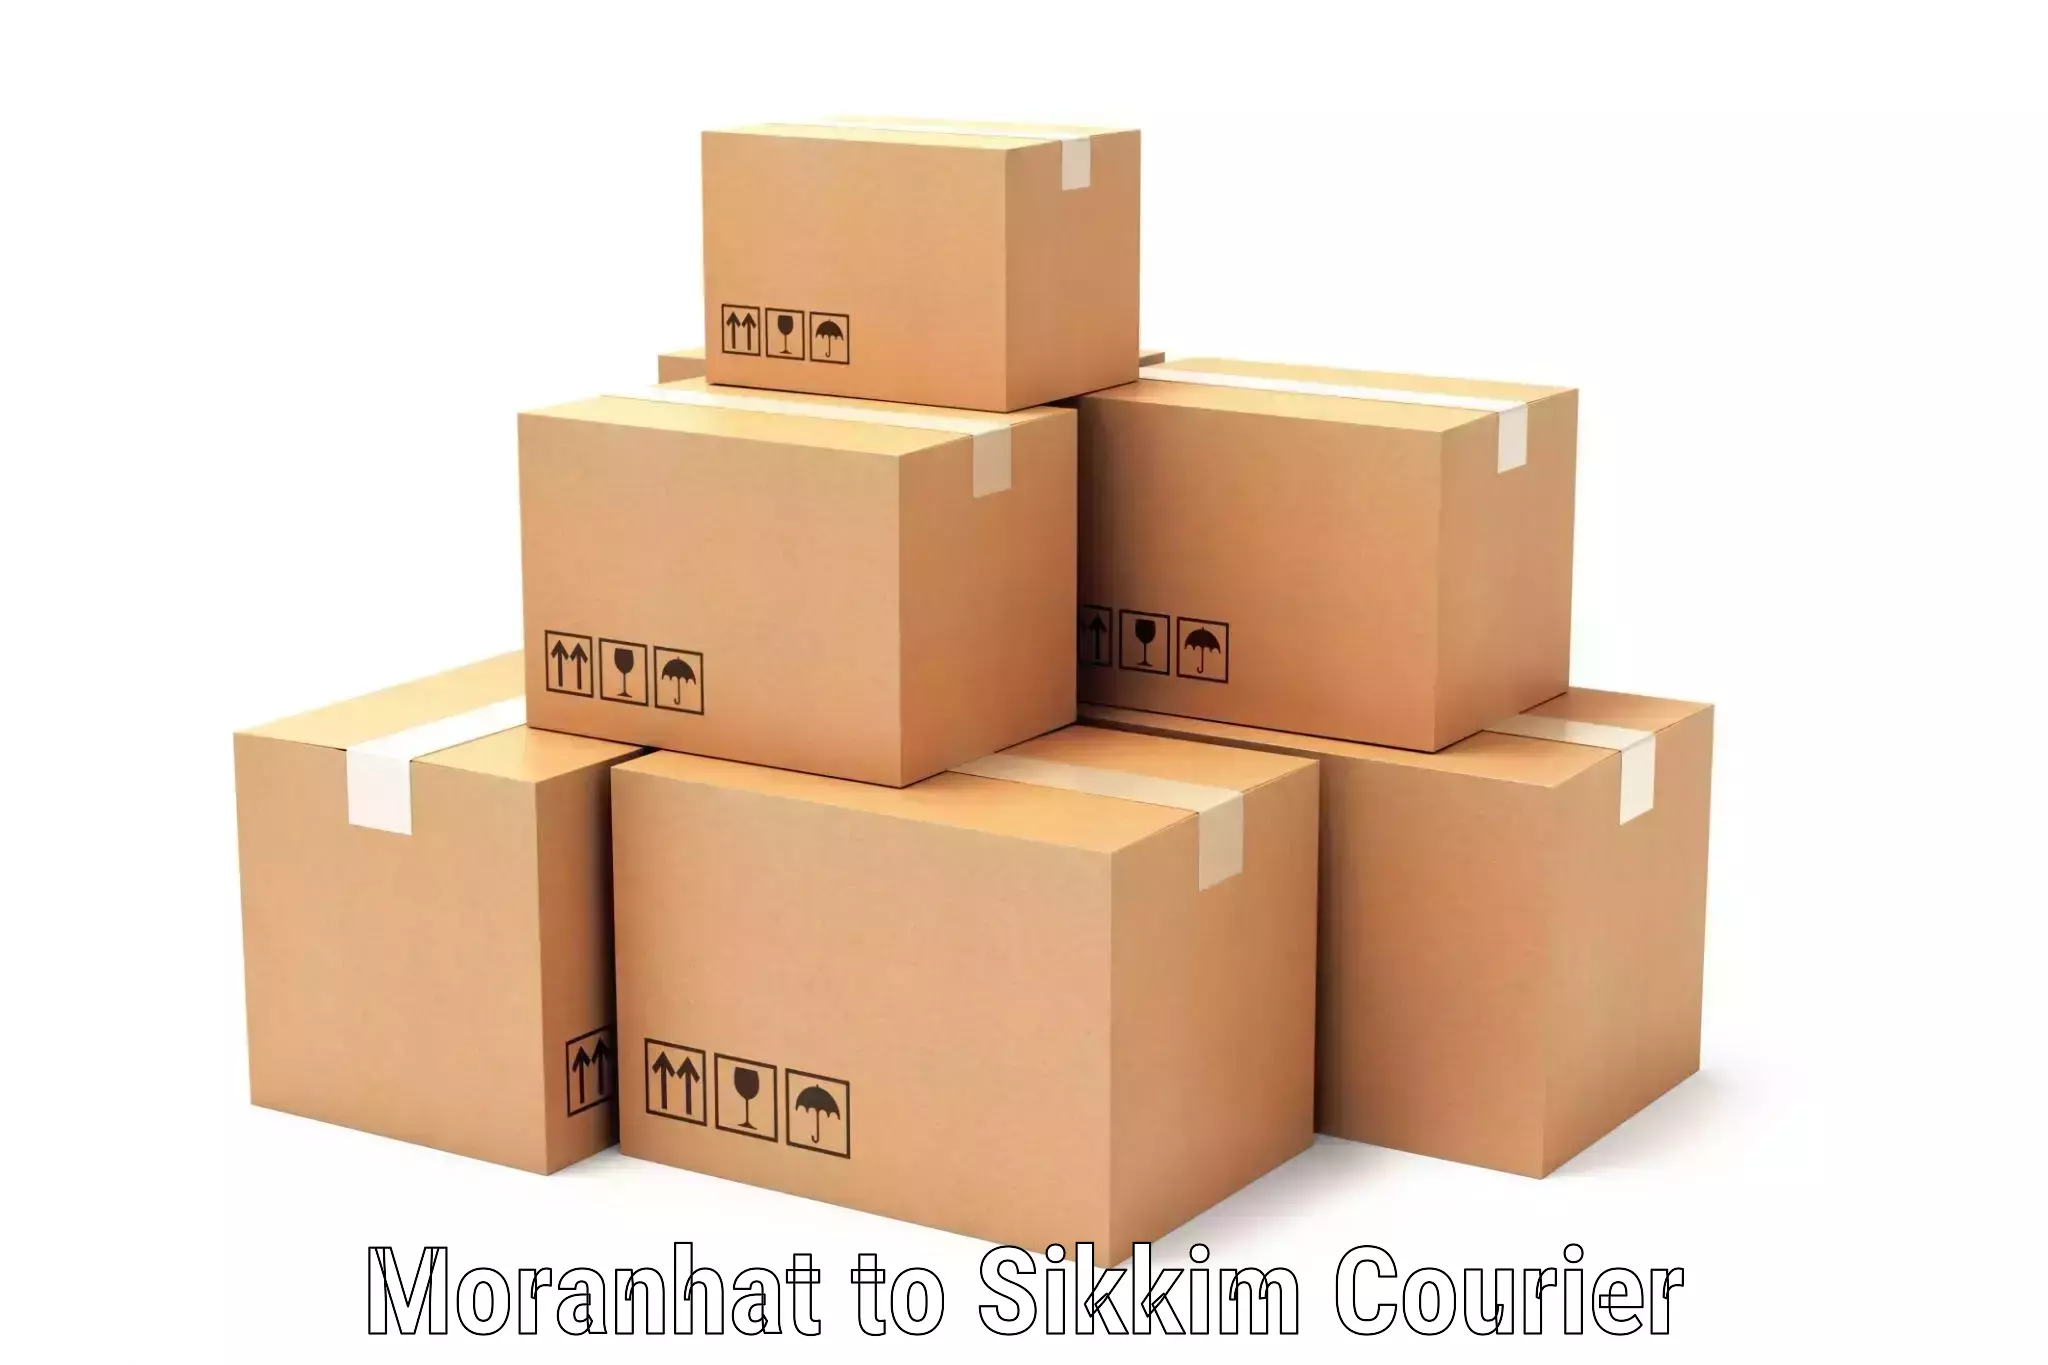 Discounted shipping Moranhat to Sikkim